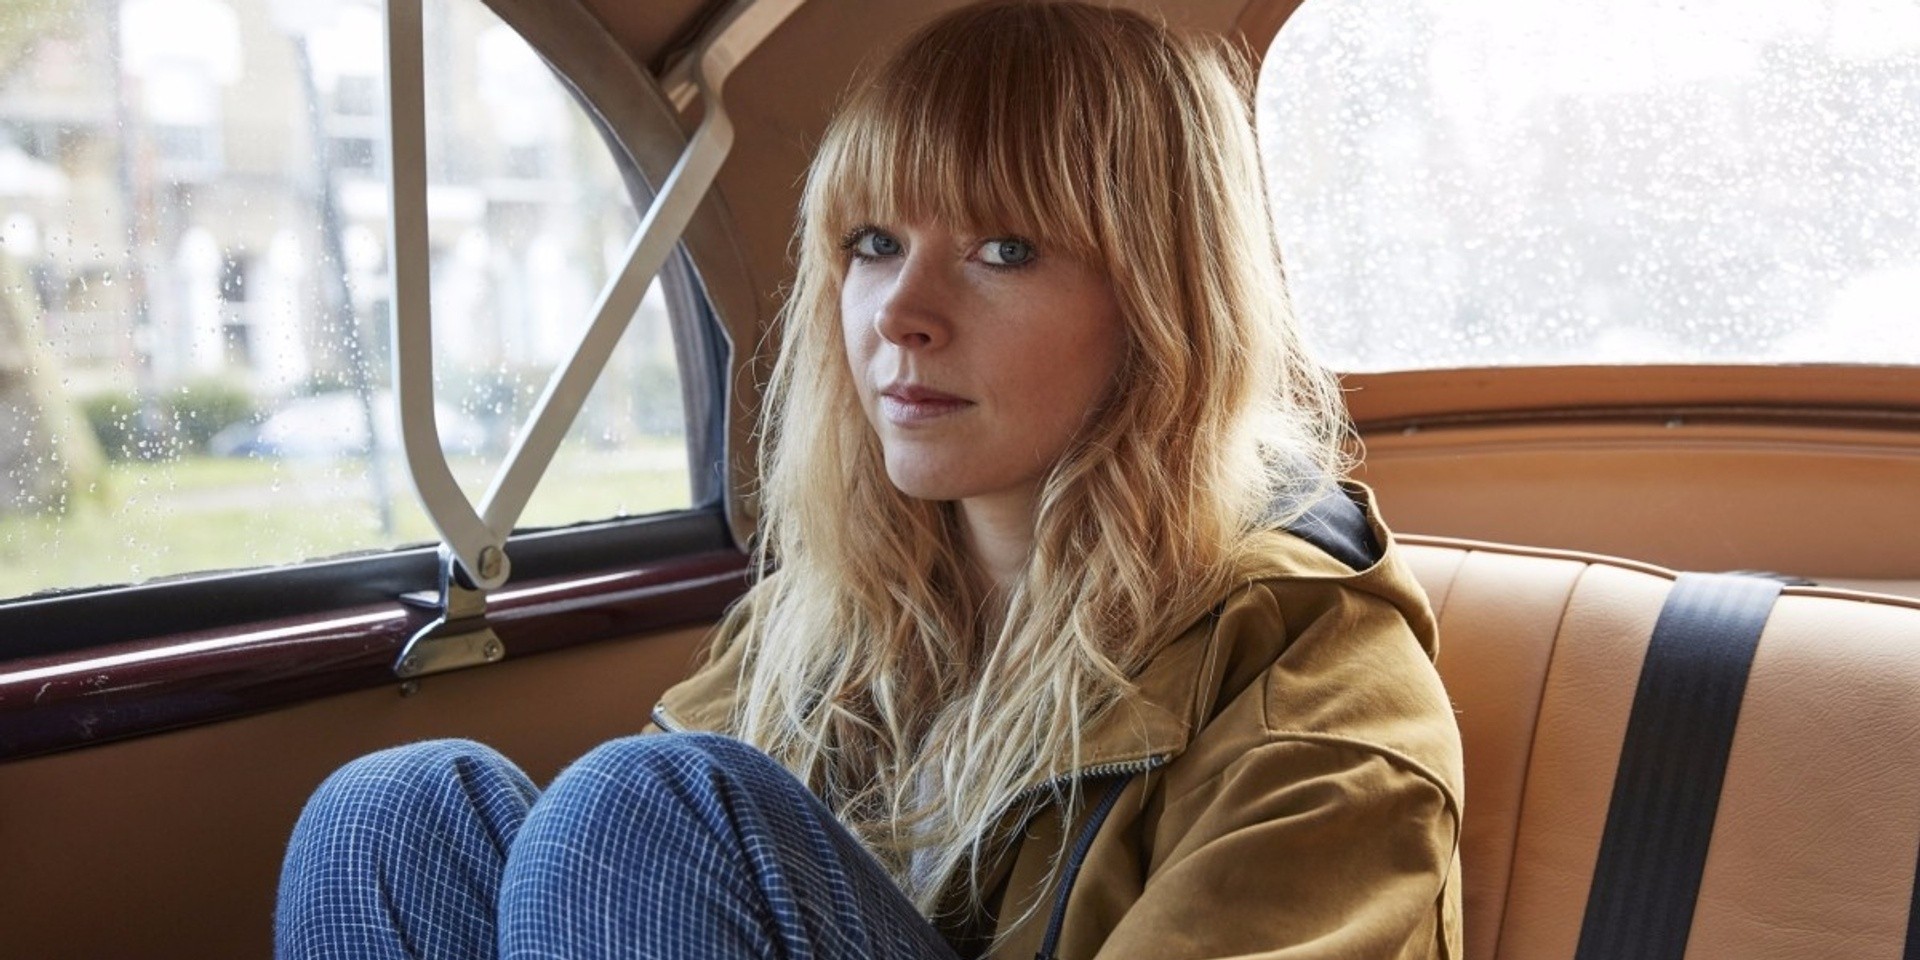 Lucy Rose releases music video for "Is This Called Home"